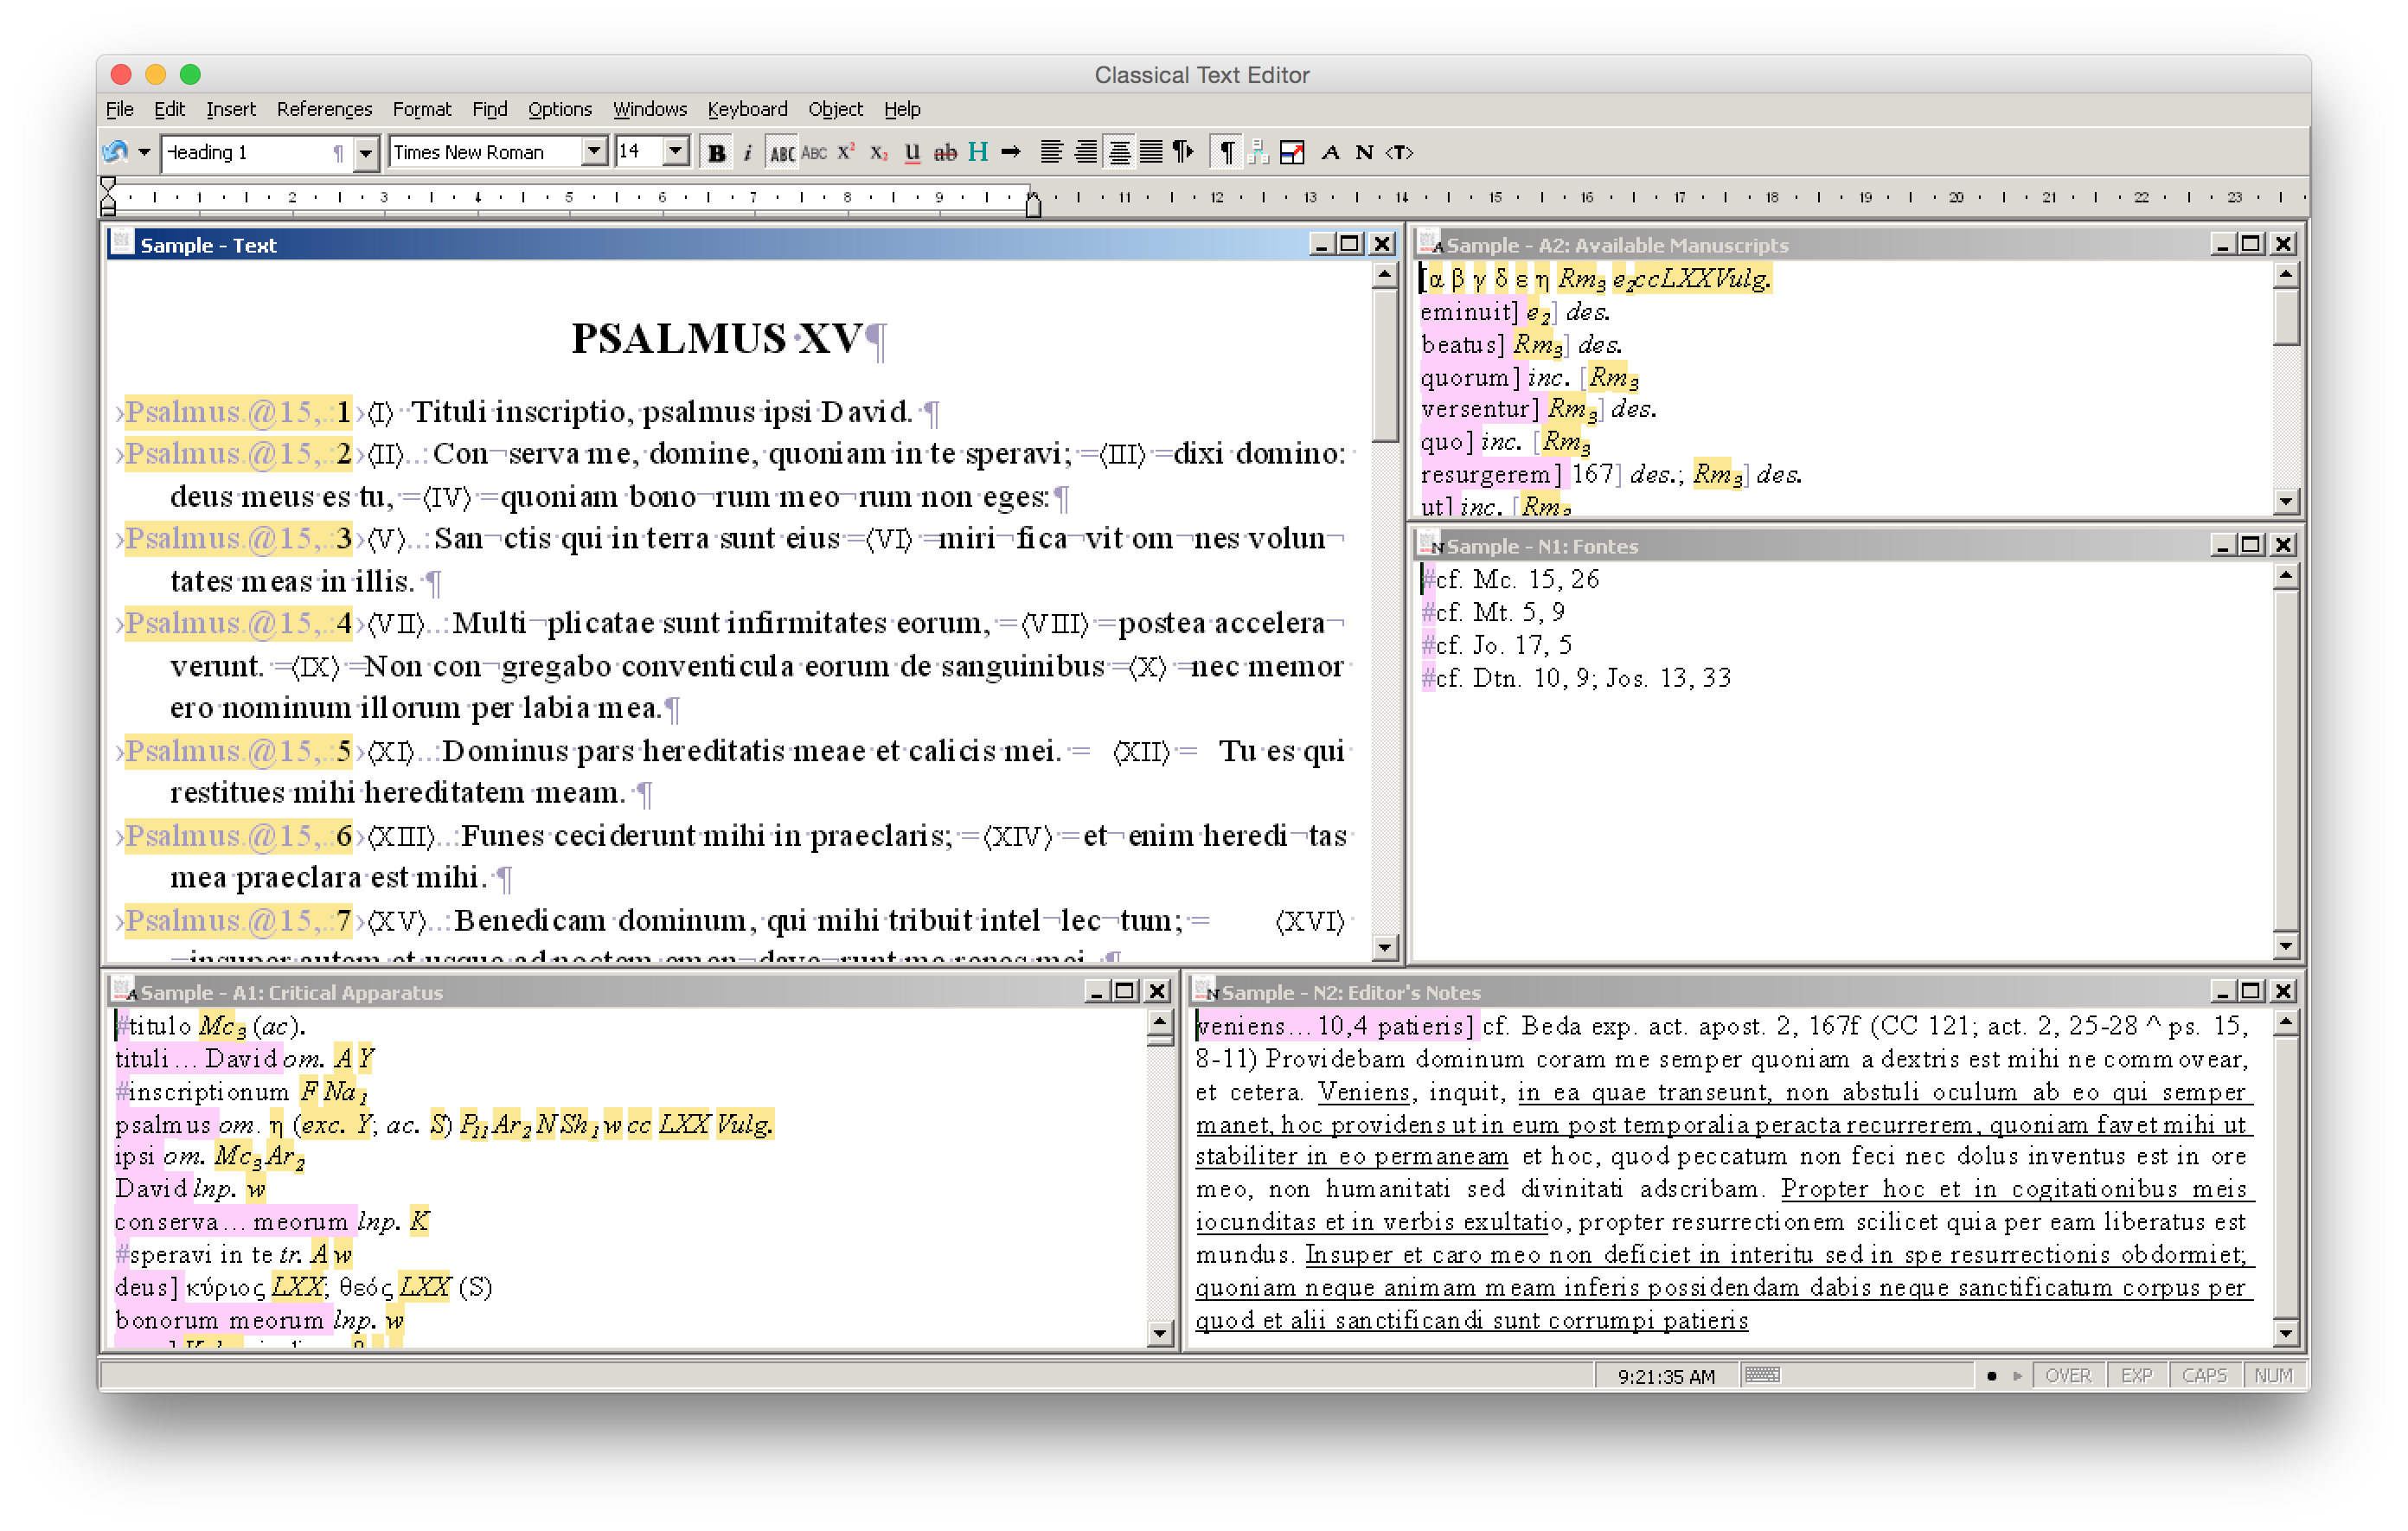 Classical Text Editor running under Wine